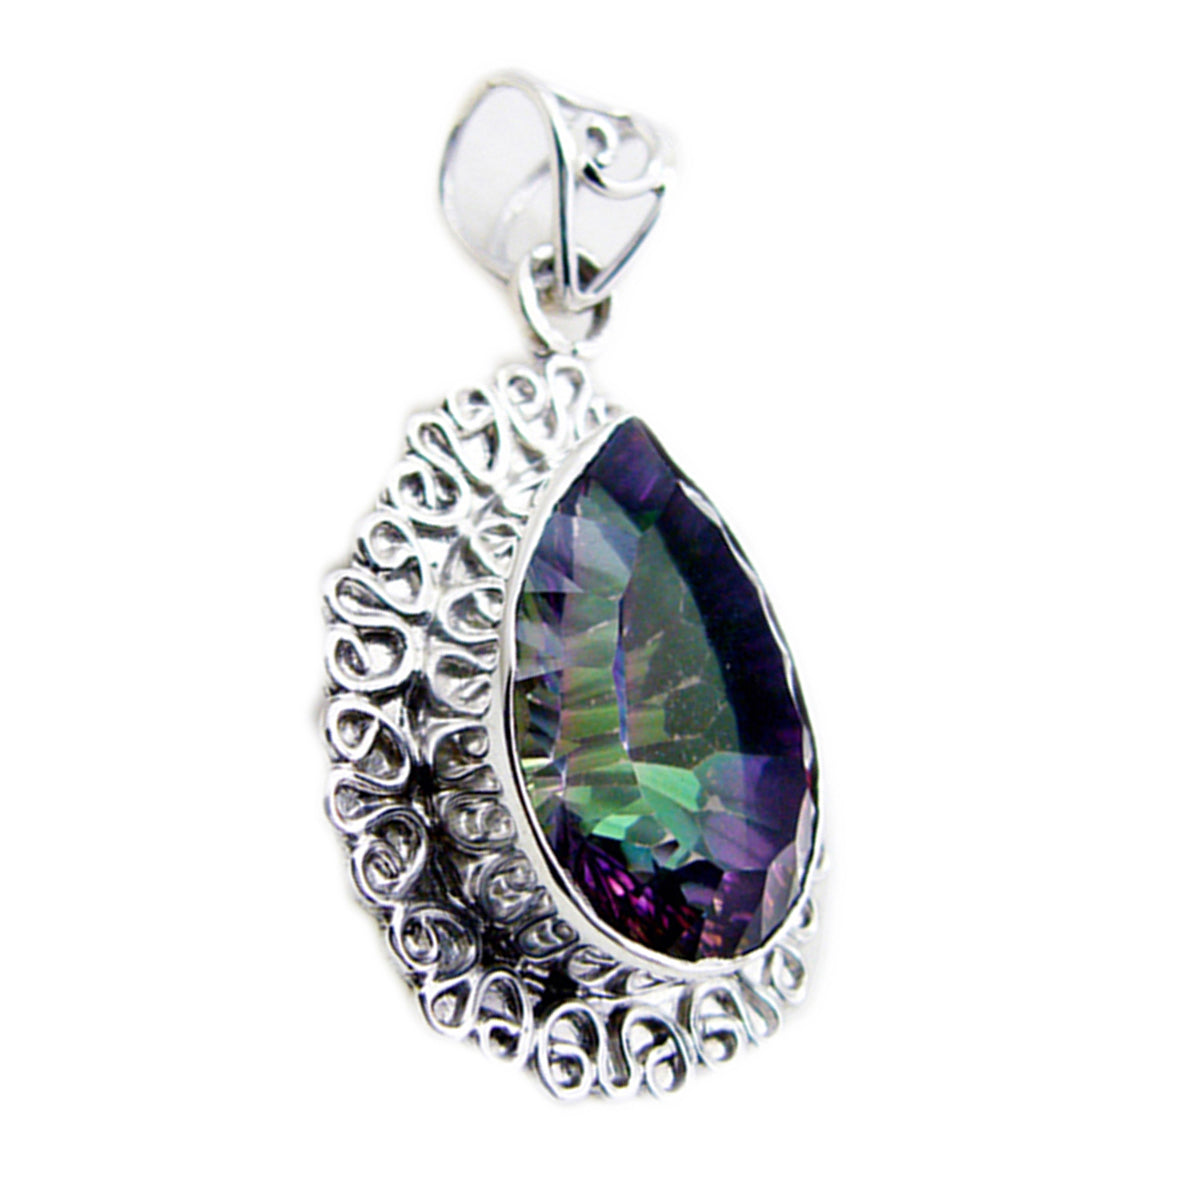 Riyo Smashing Gems Pear Faceted Multi Color Mystic Quartz Silver Pendant Gift For Boxing Day